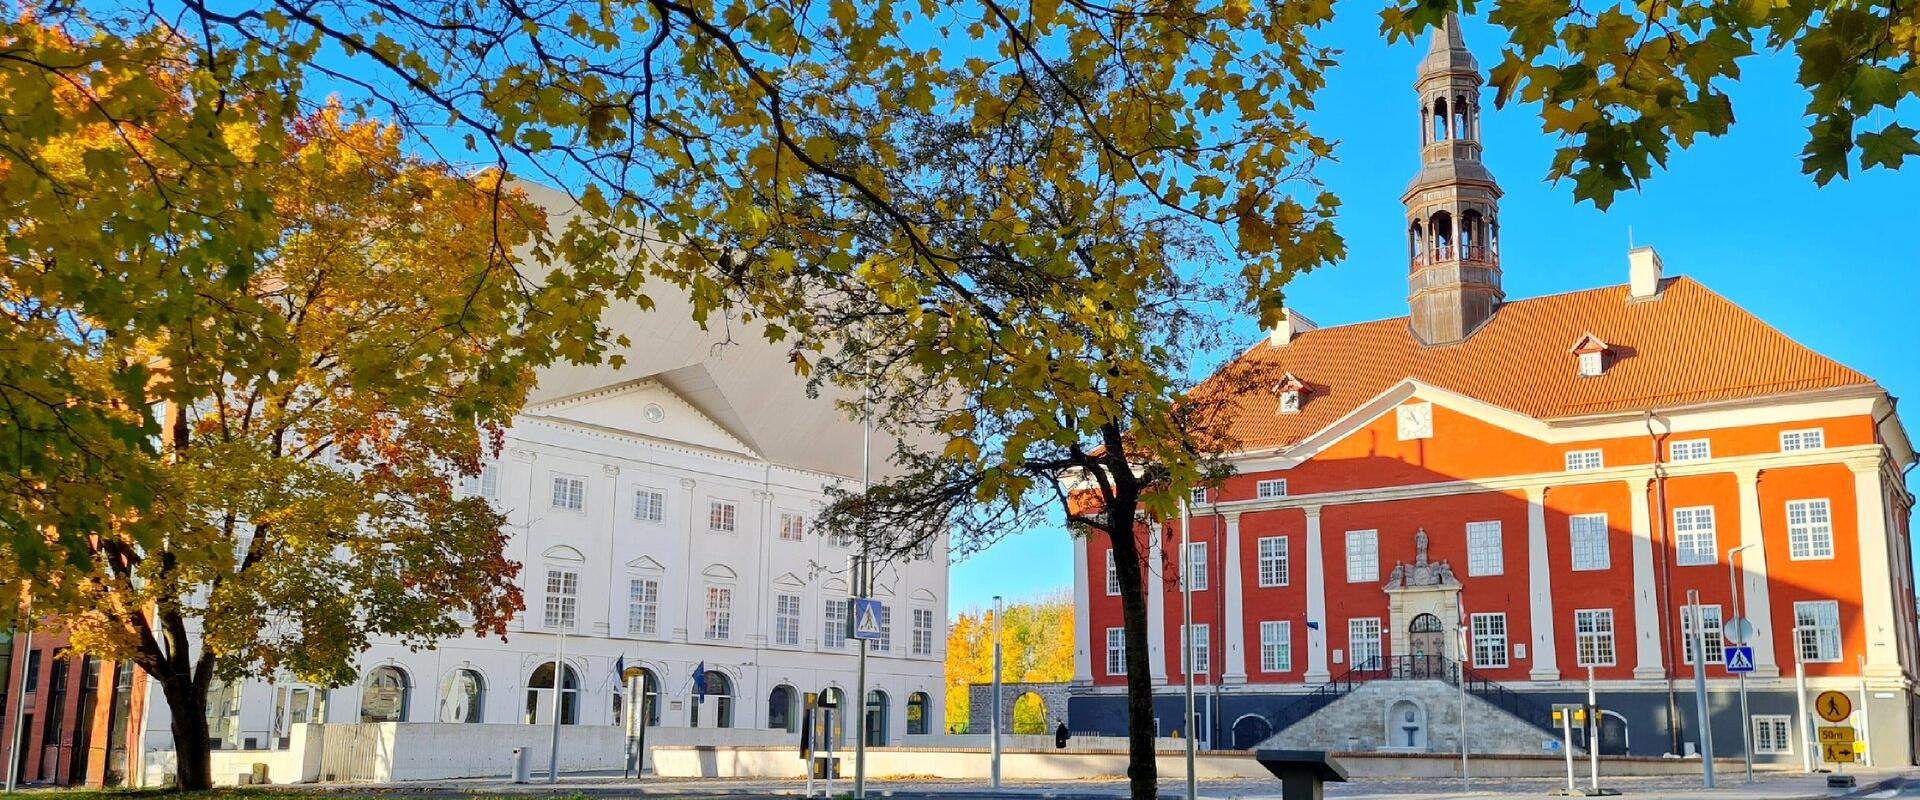 Narva Town Hall and Narva College from the outside